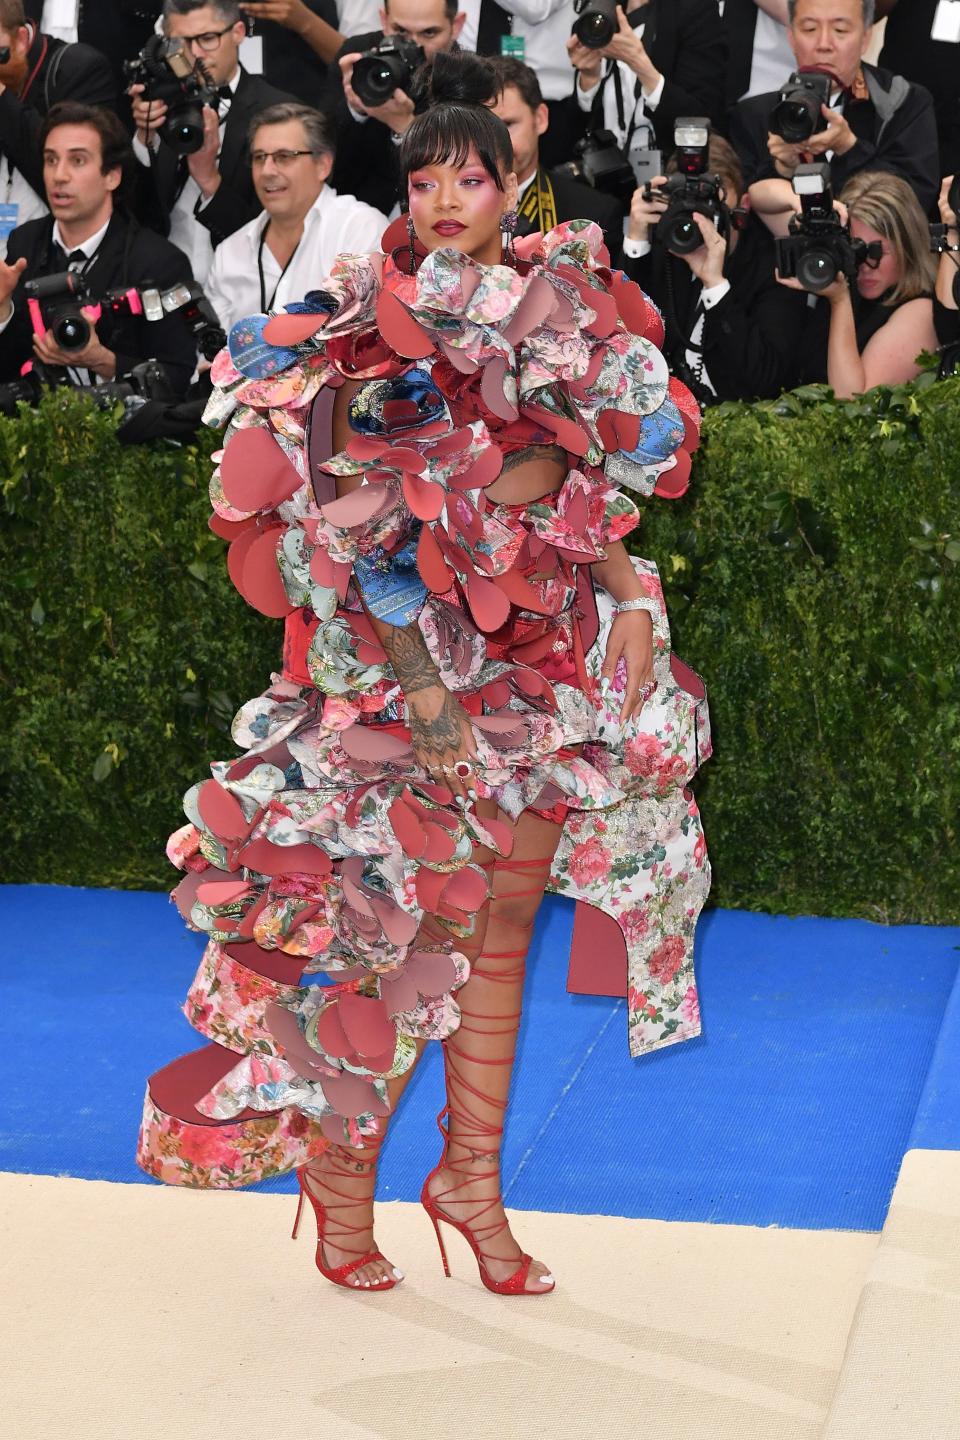 Rihanna poses for photos on a previous Met Gala red carpet in strappy red heels and a sculptural look made from colorful floral fabrics.